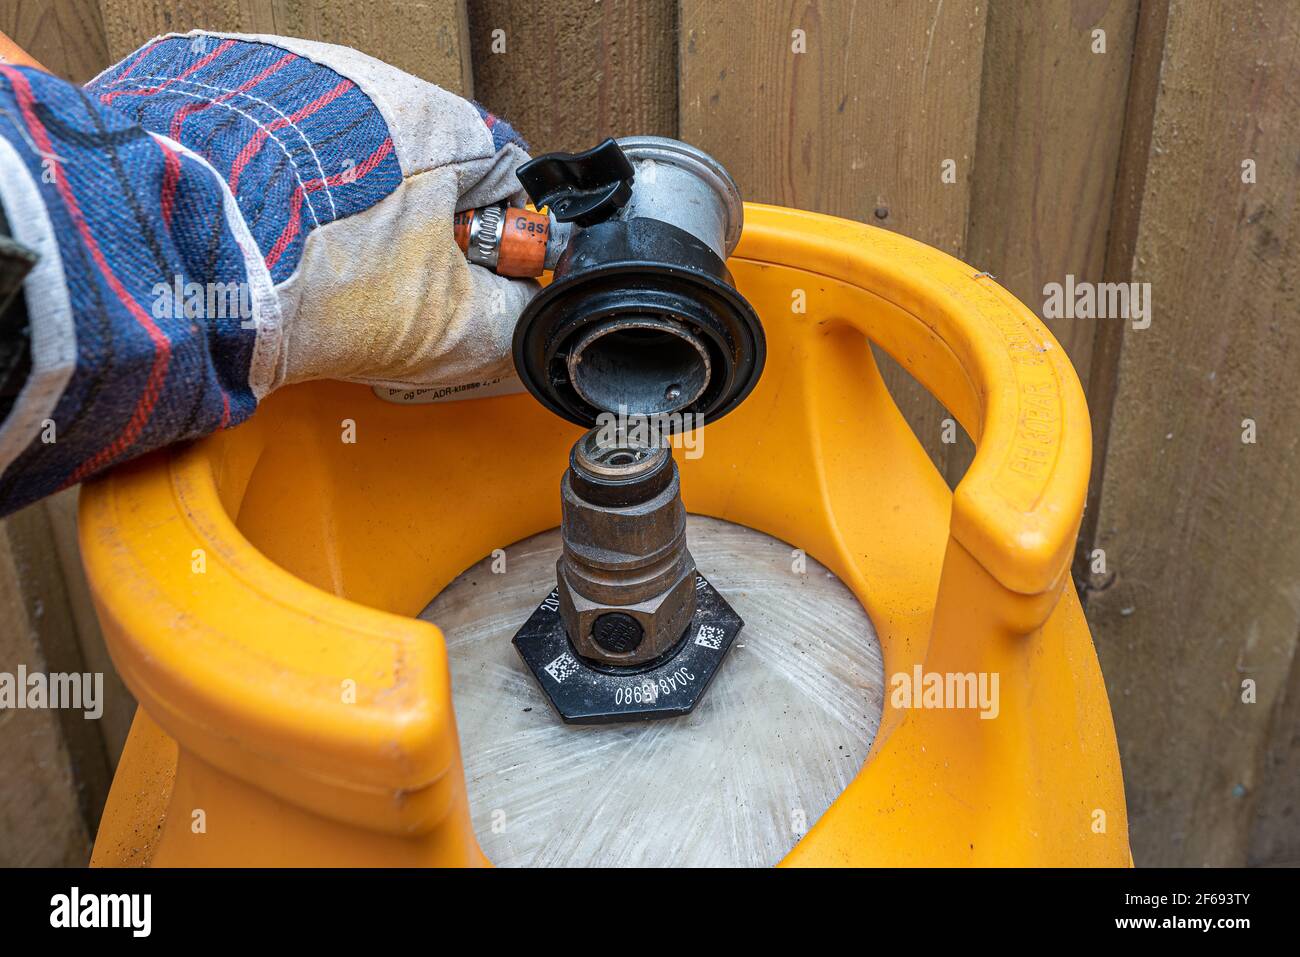 a hand with a glove mounts a Low Pressure Gas Regulator with Hose on a gas cylinder, Denmark, Mars 30, 2021 Stock Photo